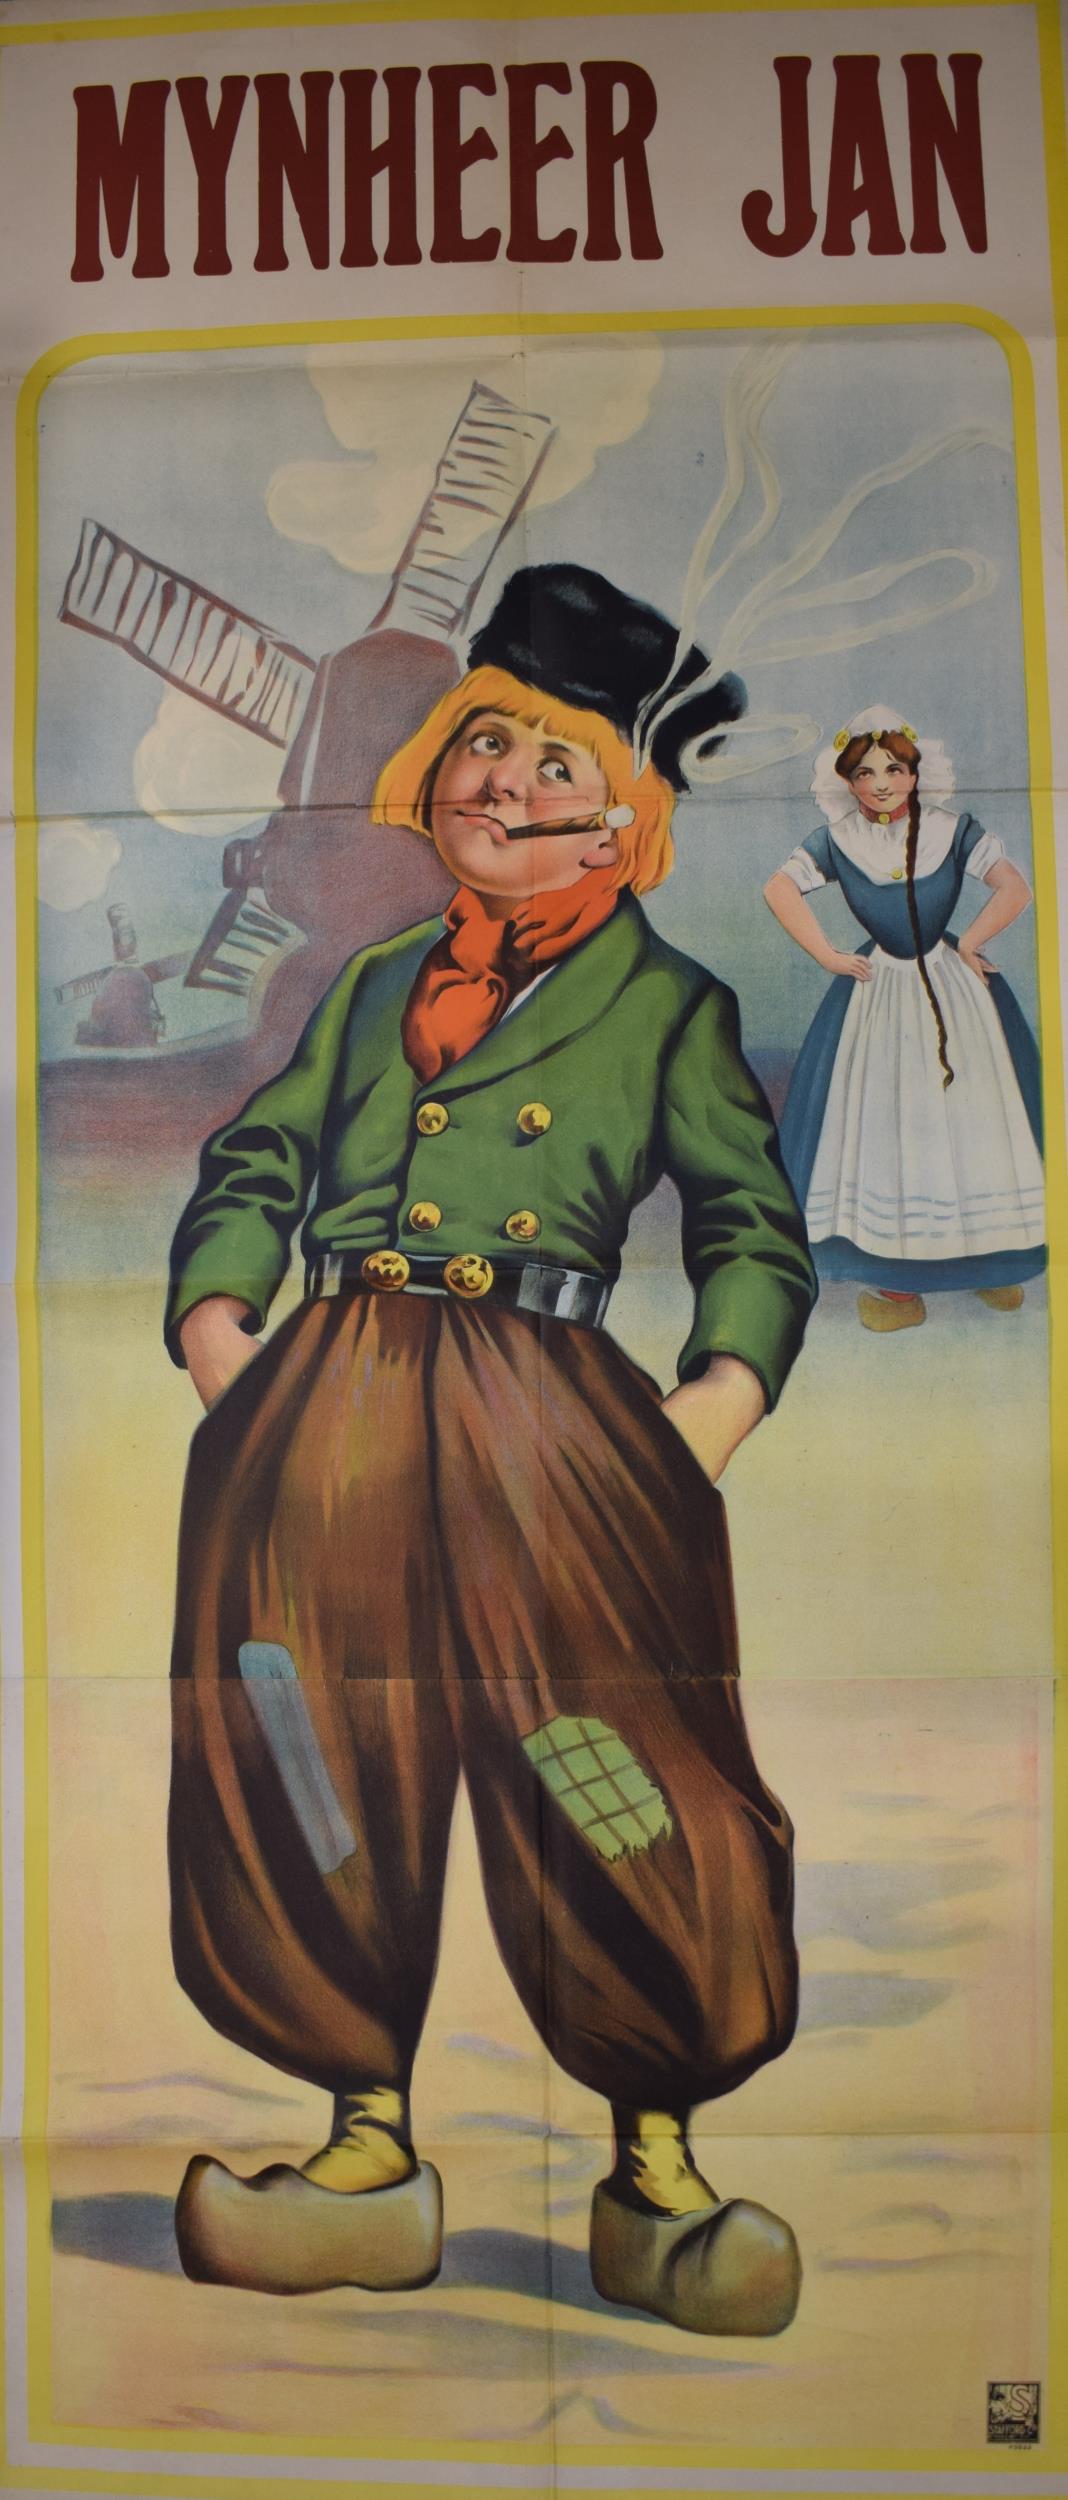 Original Colour Advertising Poster For Mynheer Jan Opera By Jacobowski c1924 in two separate